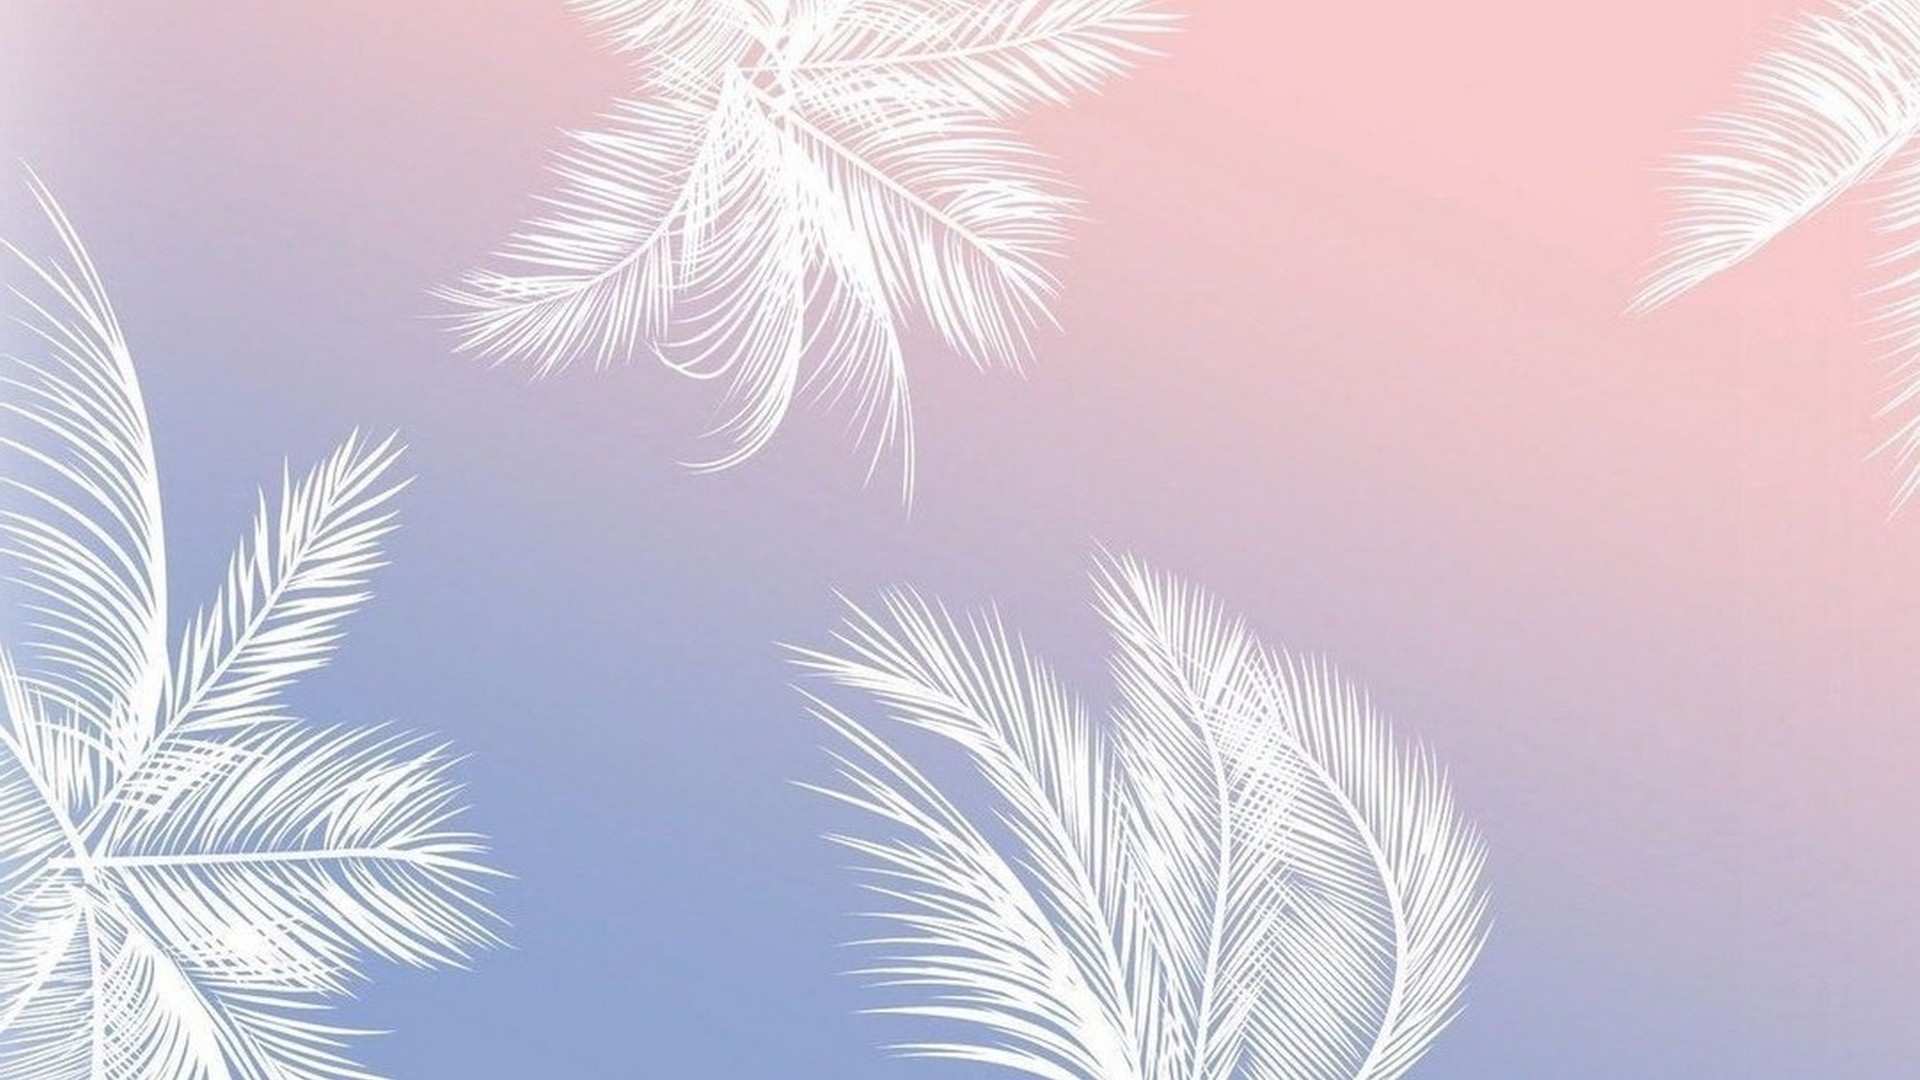 1080,1920,cute,for,gold,rose,windows,cute rose gold wallpapers. 